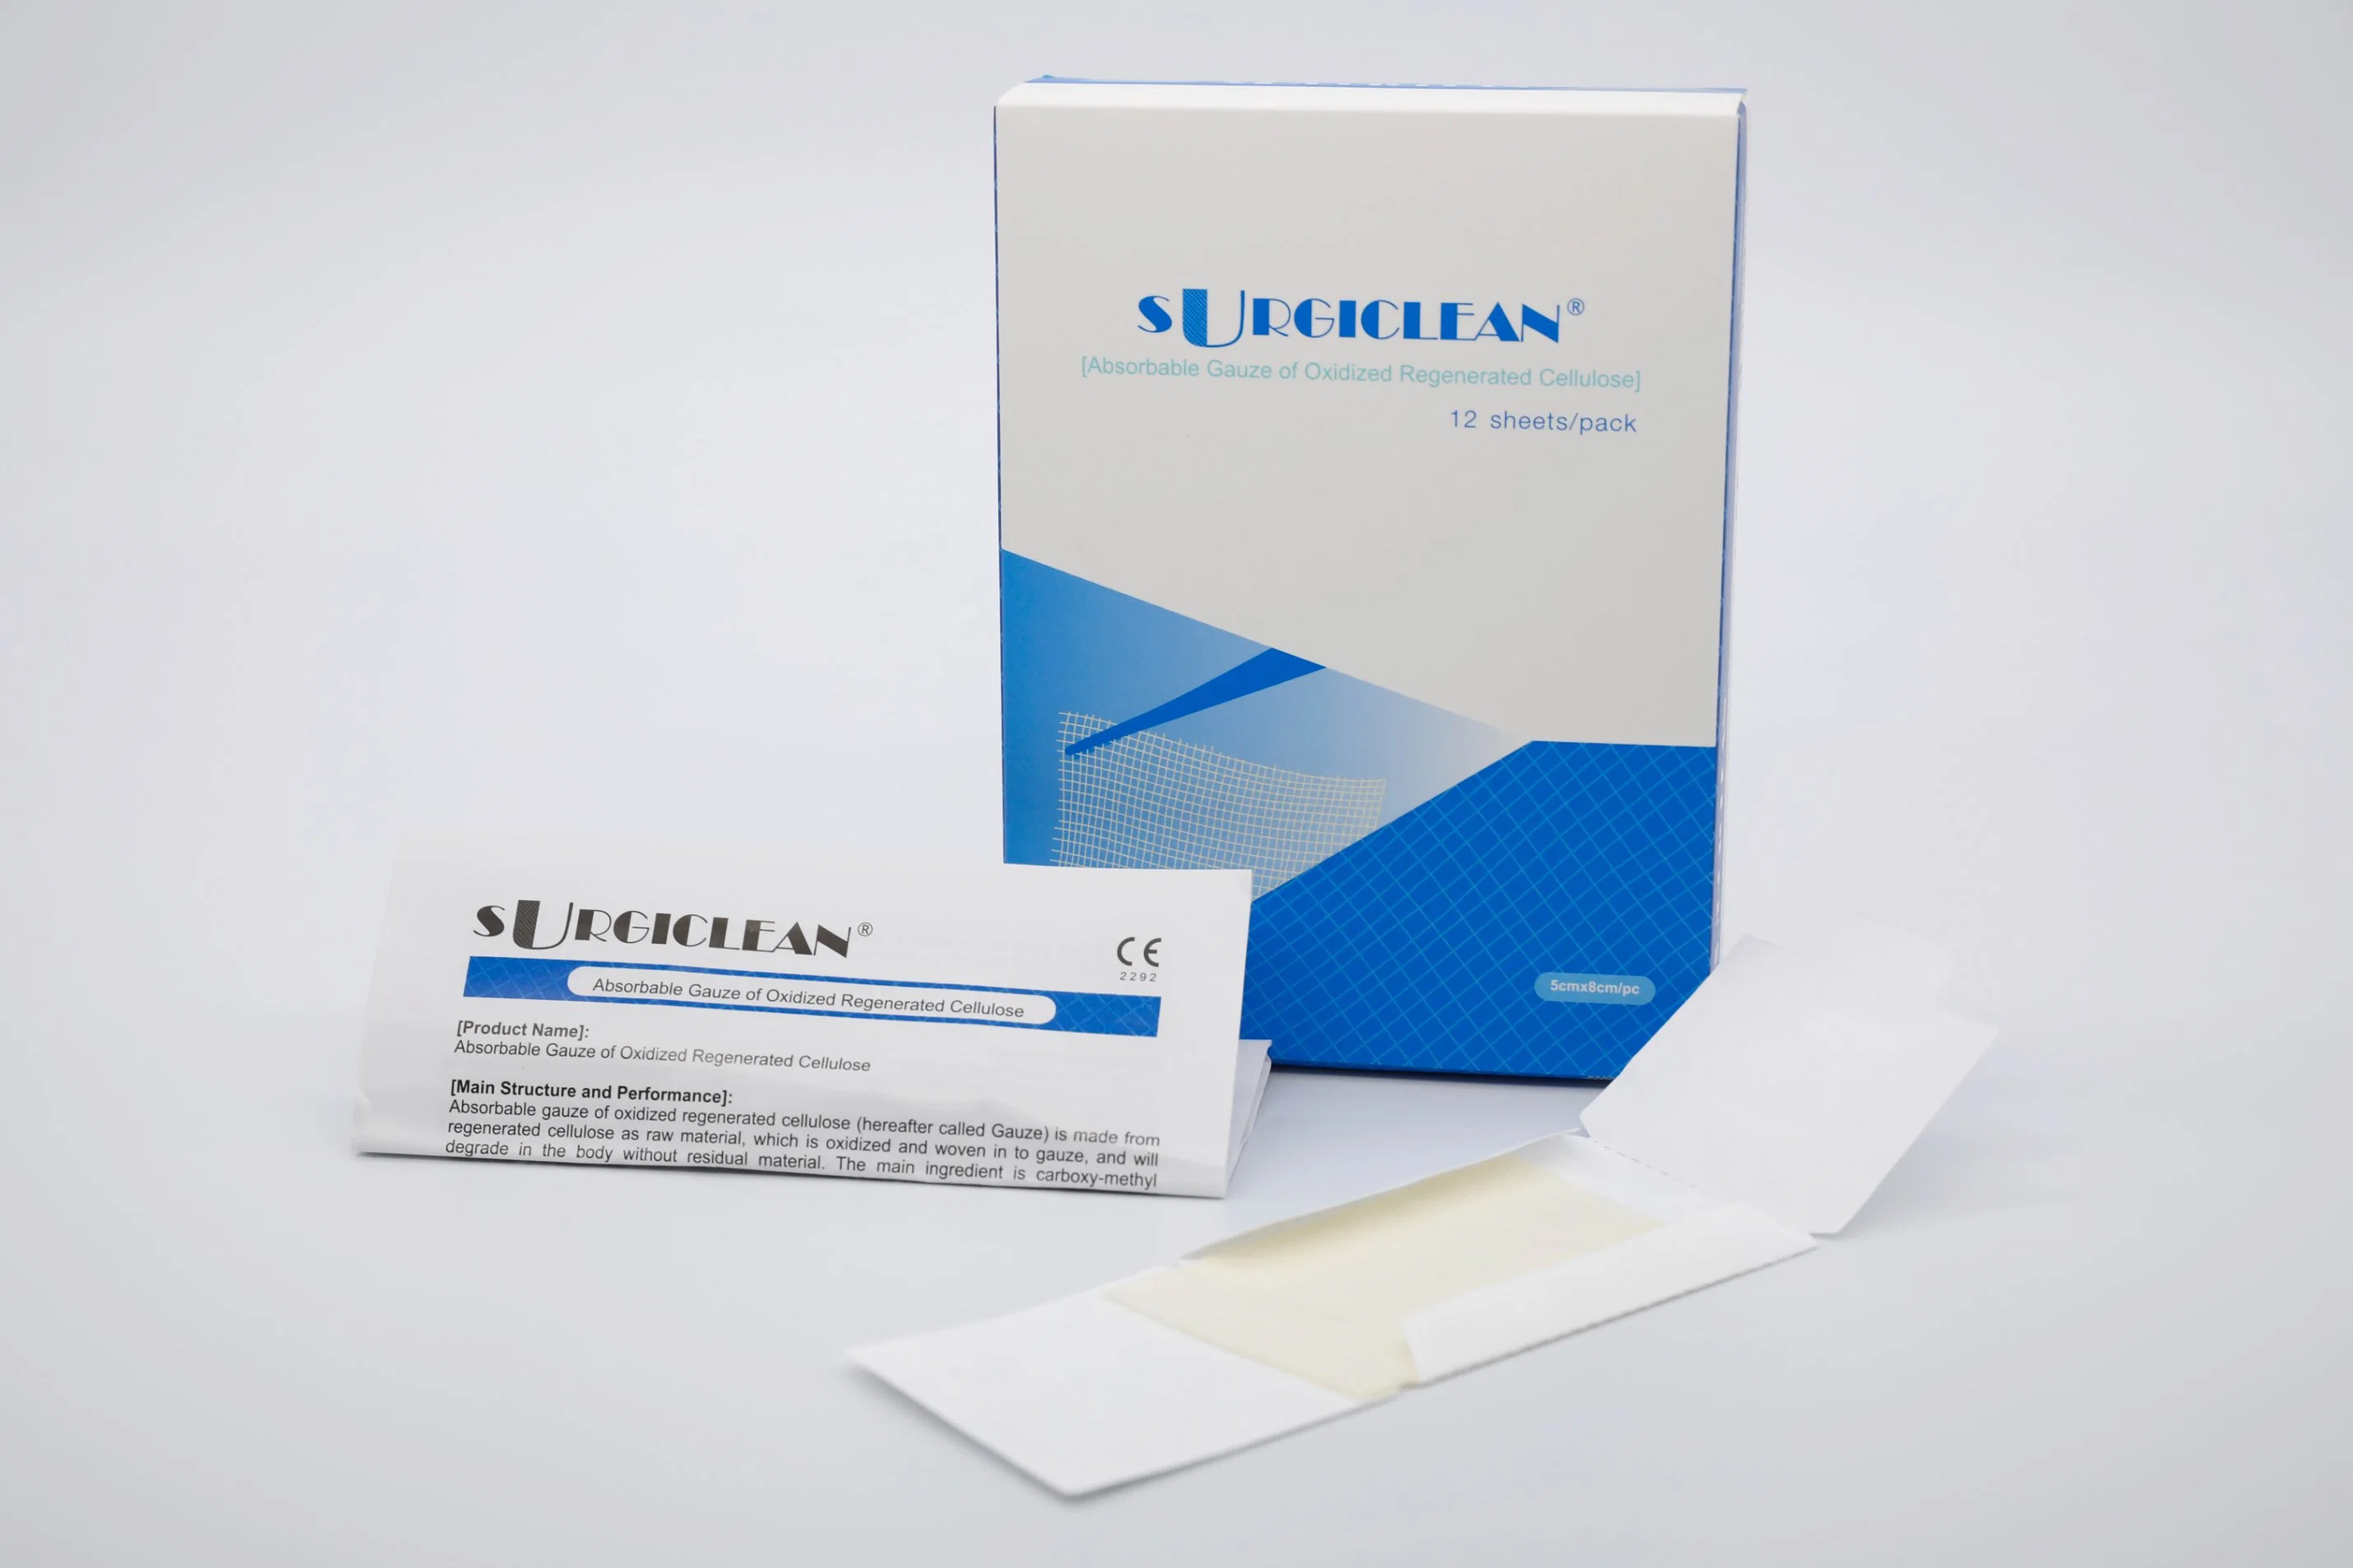 Surgiclean Absorbable Gauze Oxidized Regenerated Cellulose 5*8 Cm Stop Bleeding in Surgery